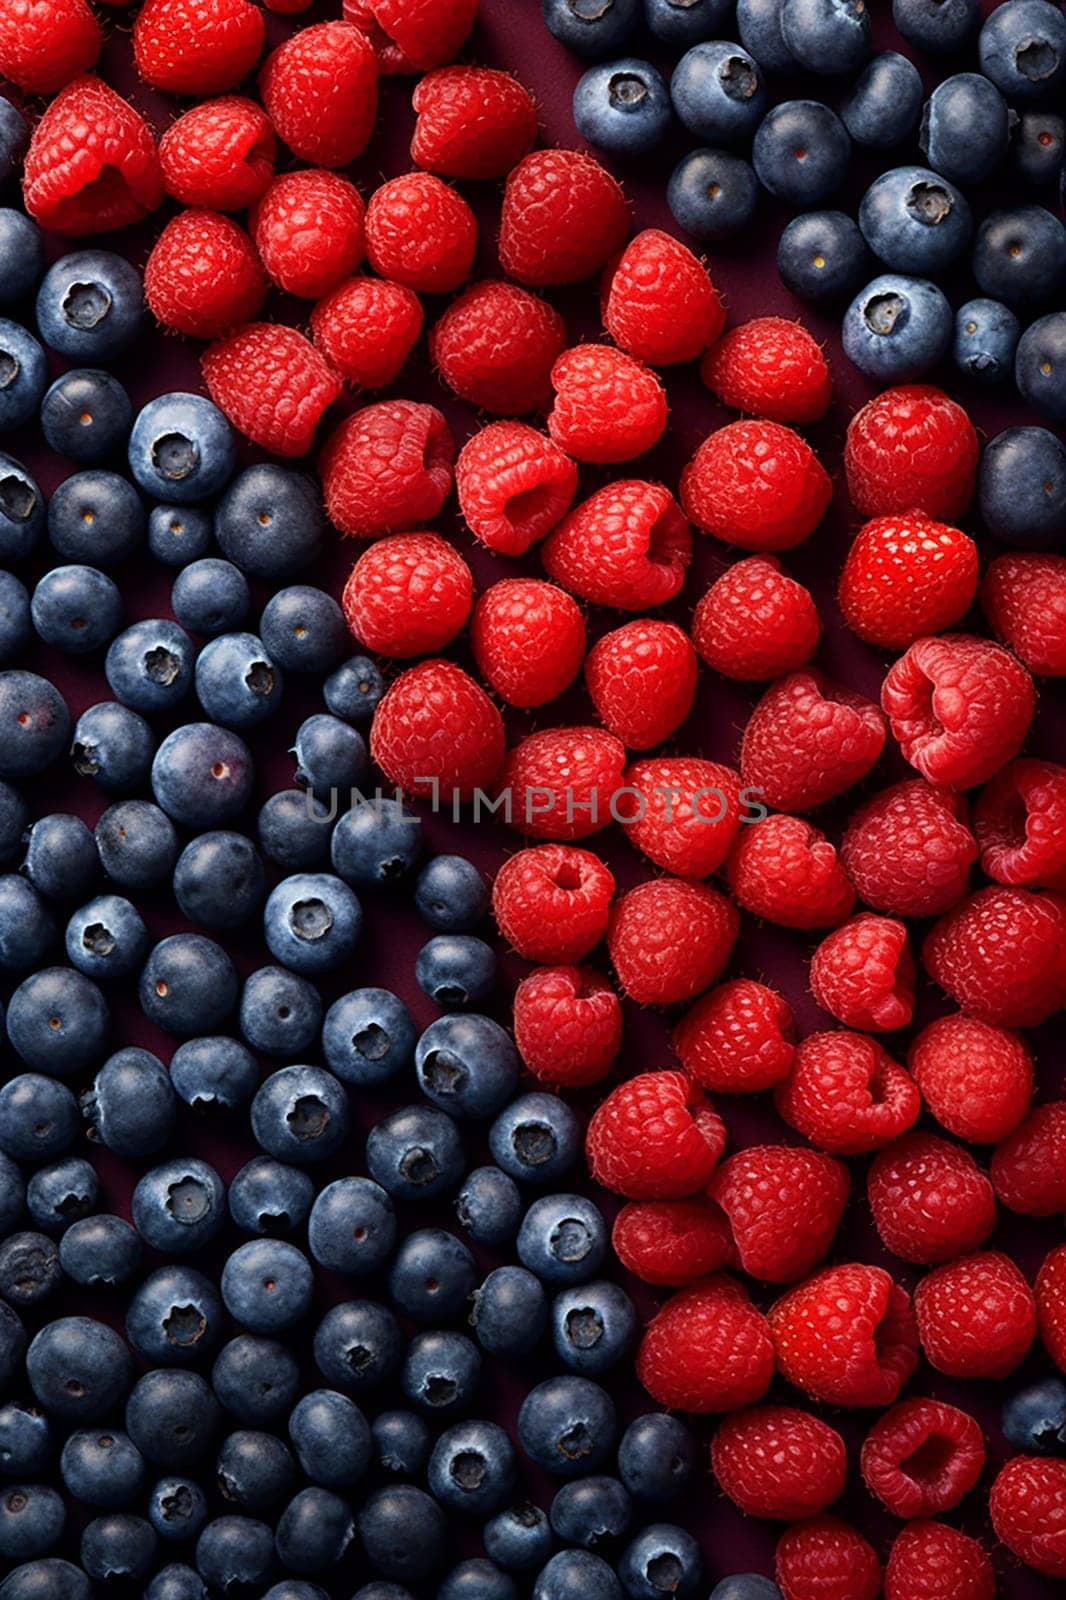 Assortment of raspberries and blueberries arranged to form a pattern. by Hype2art